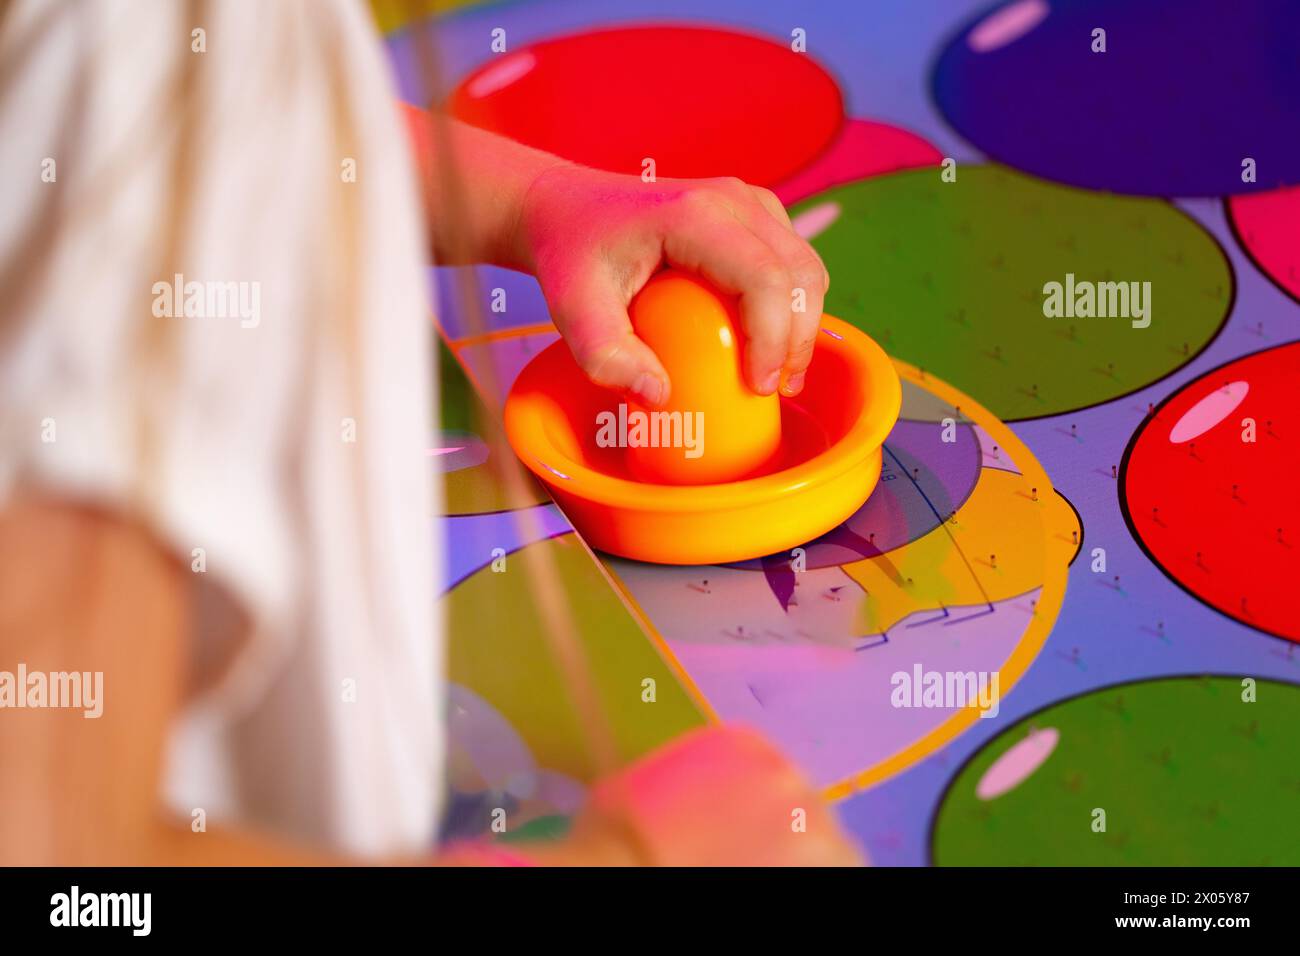 Young Child Playing Twister Game With Colorful Spinner on Bright Mat Stock Photo